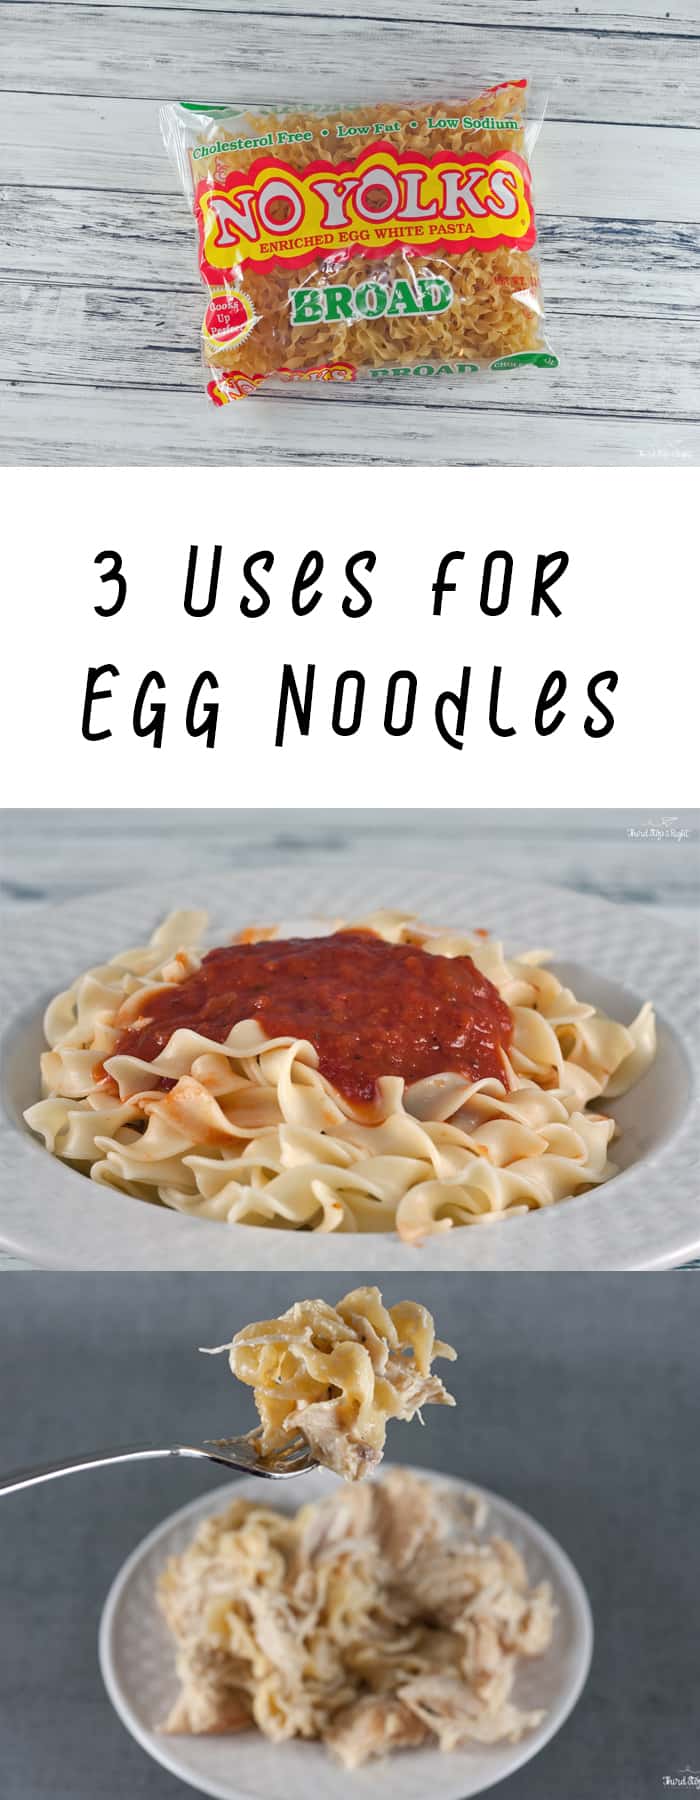 More Than a Noodle: 3 Uses for Egg Noodles